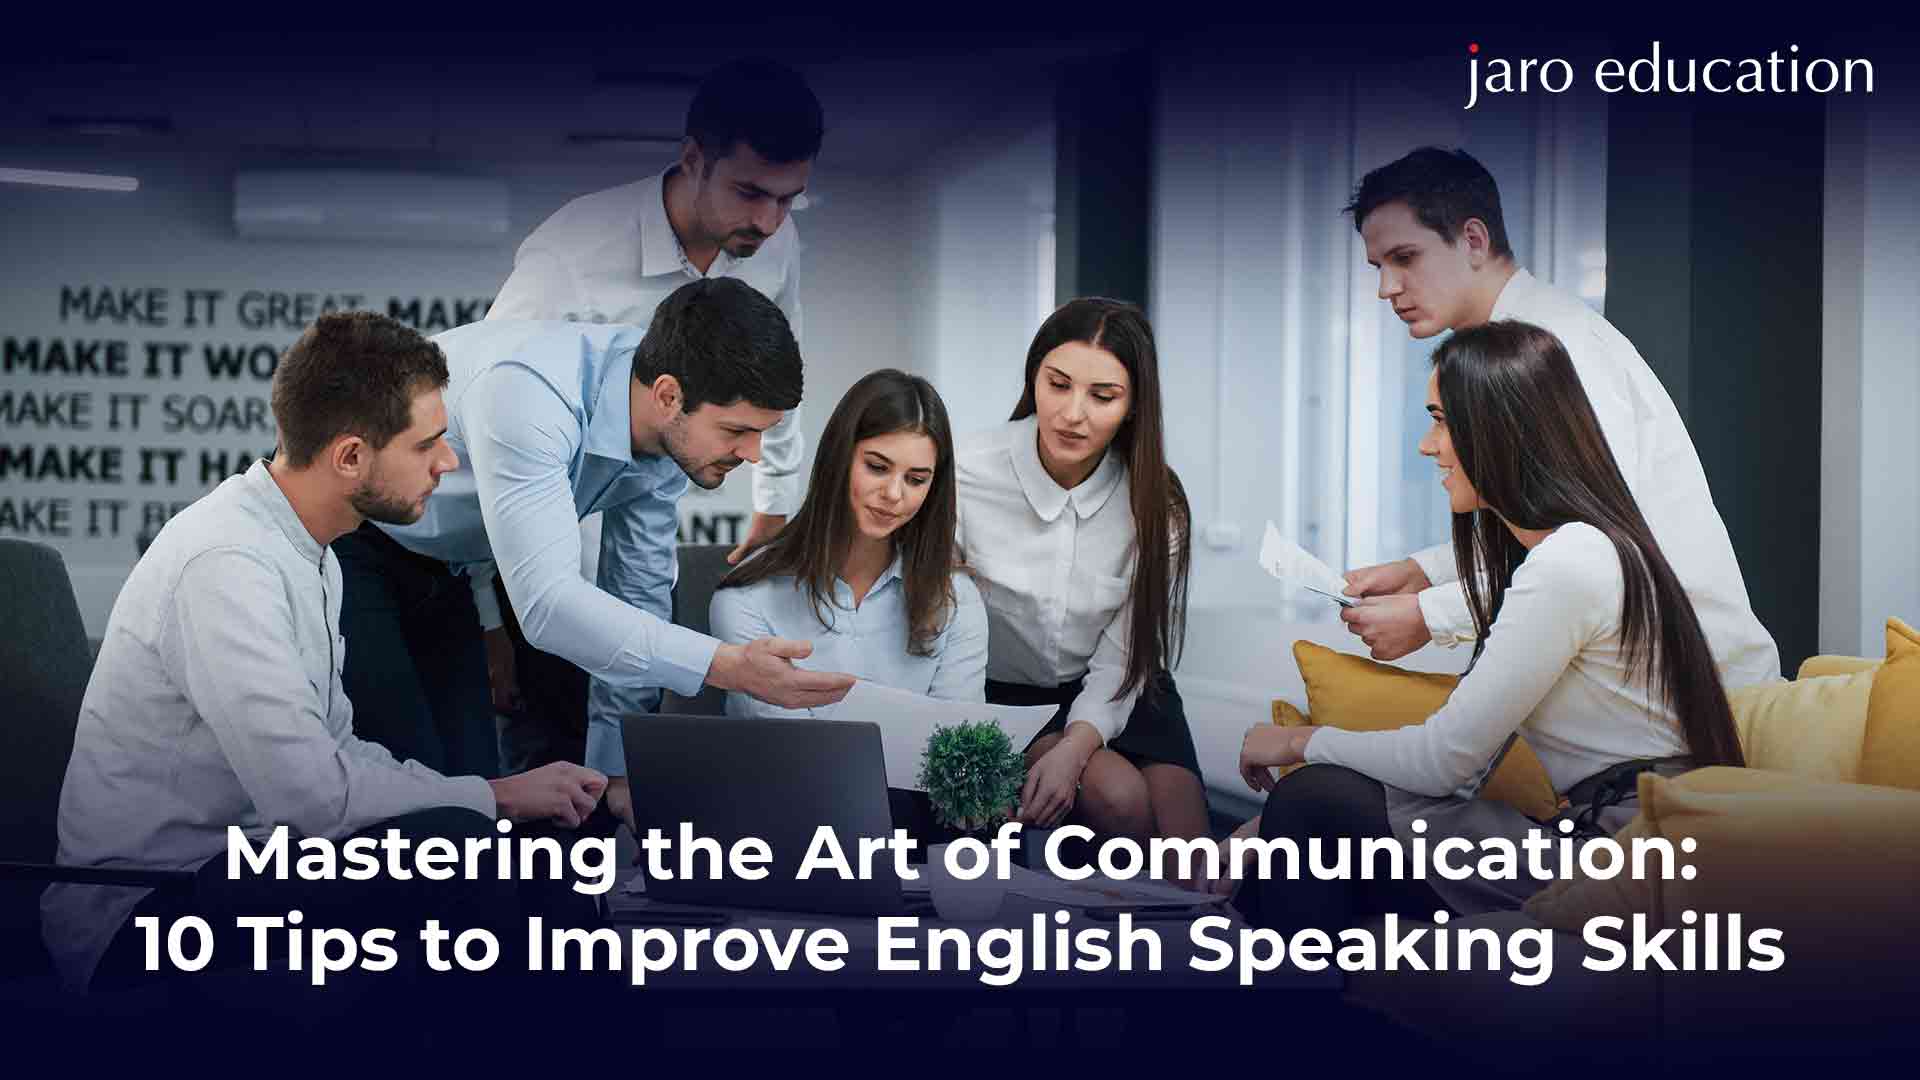 Mastering-the-Art-of-Communication-10-Tips-to-Improve-English-Speaking-Skills